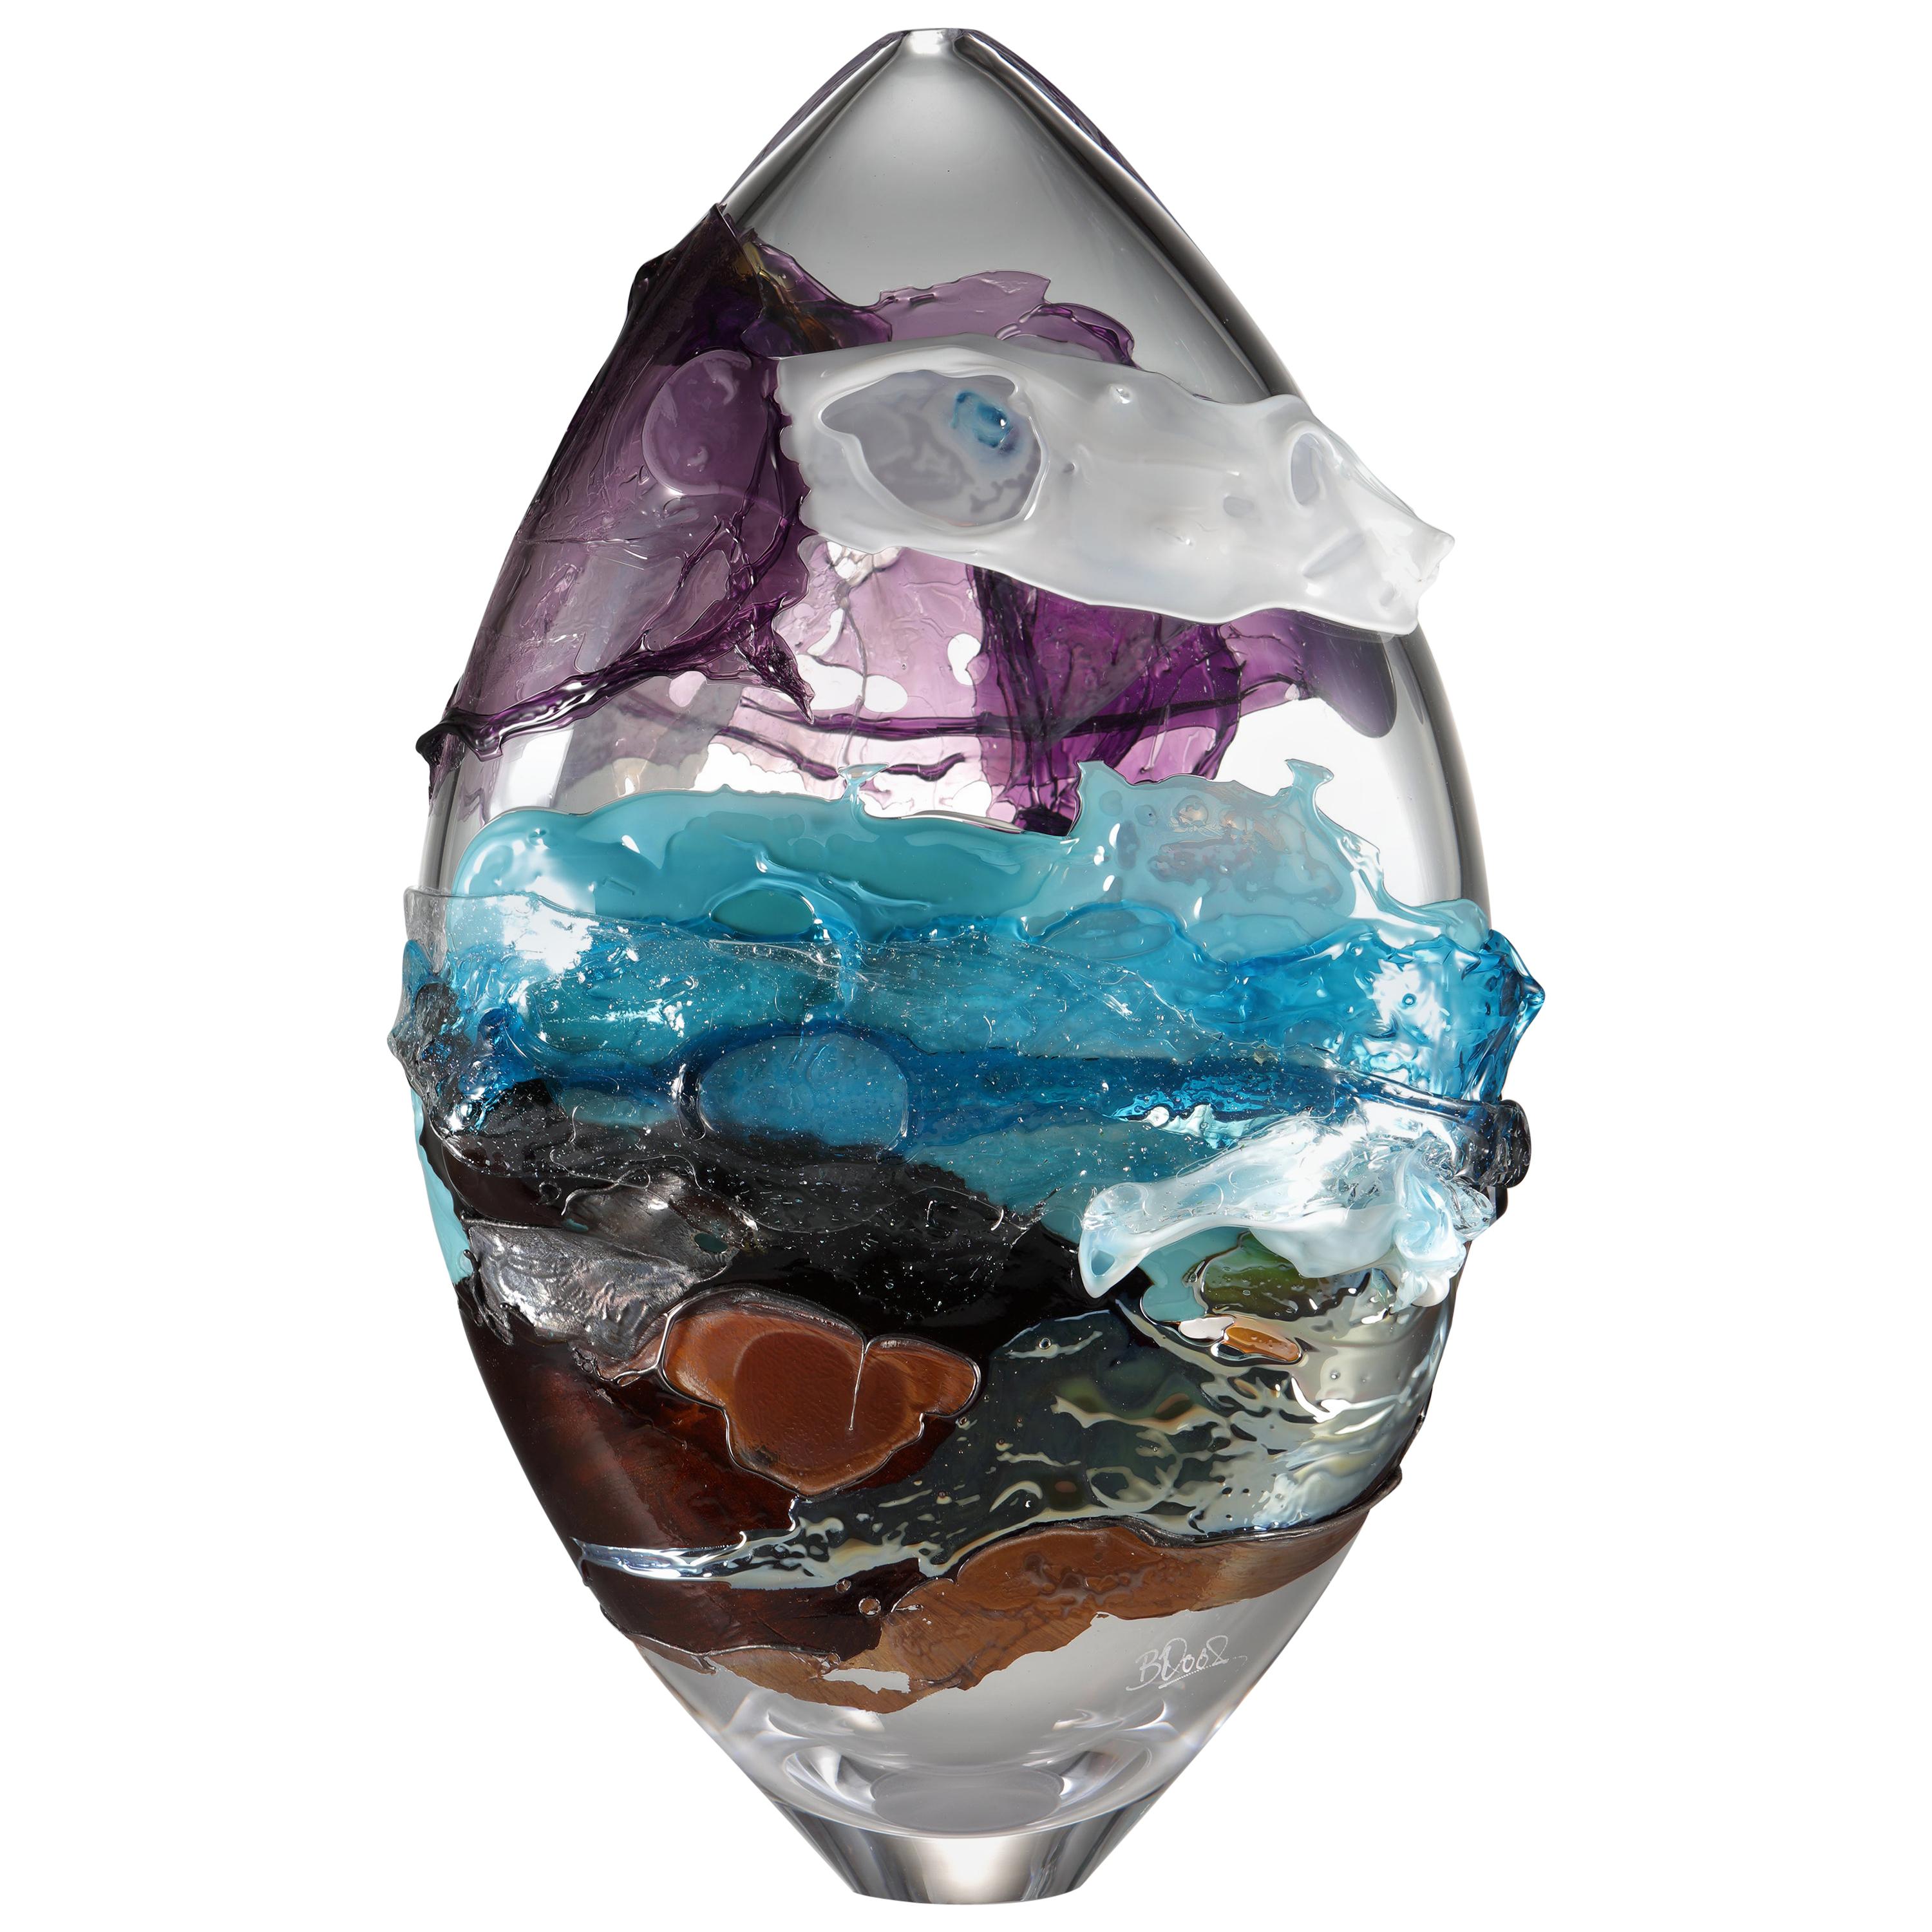 Shore II, a Blue, Purple, Brown and Mixed Colored Glass Vase by Bethany Wood